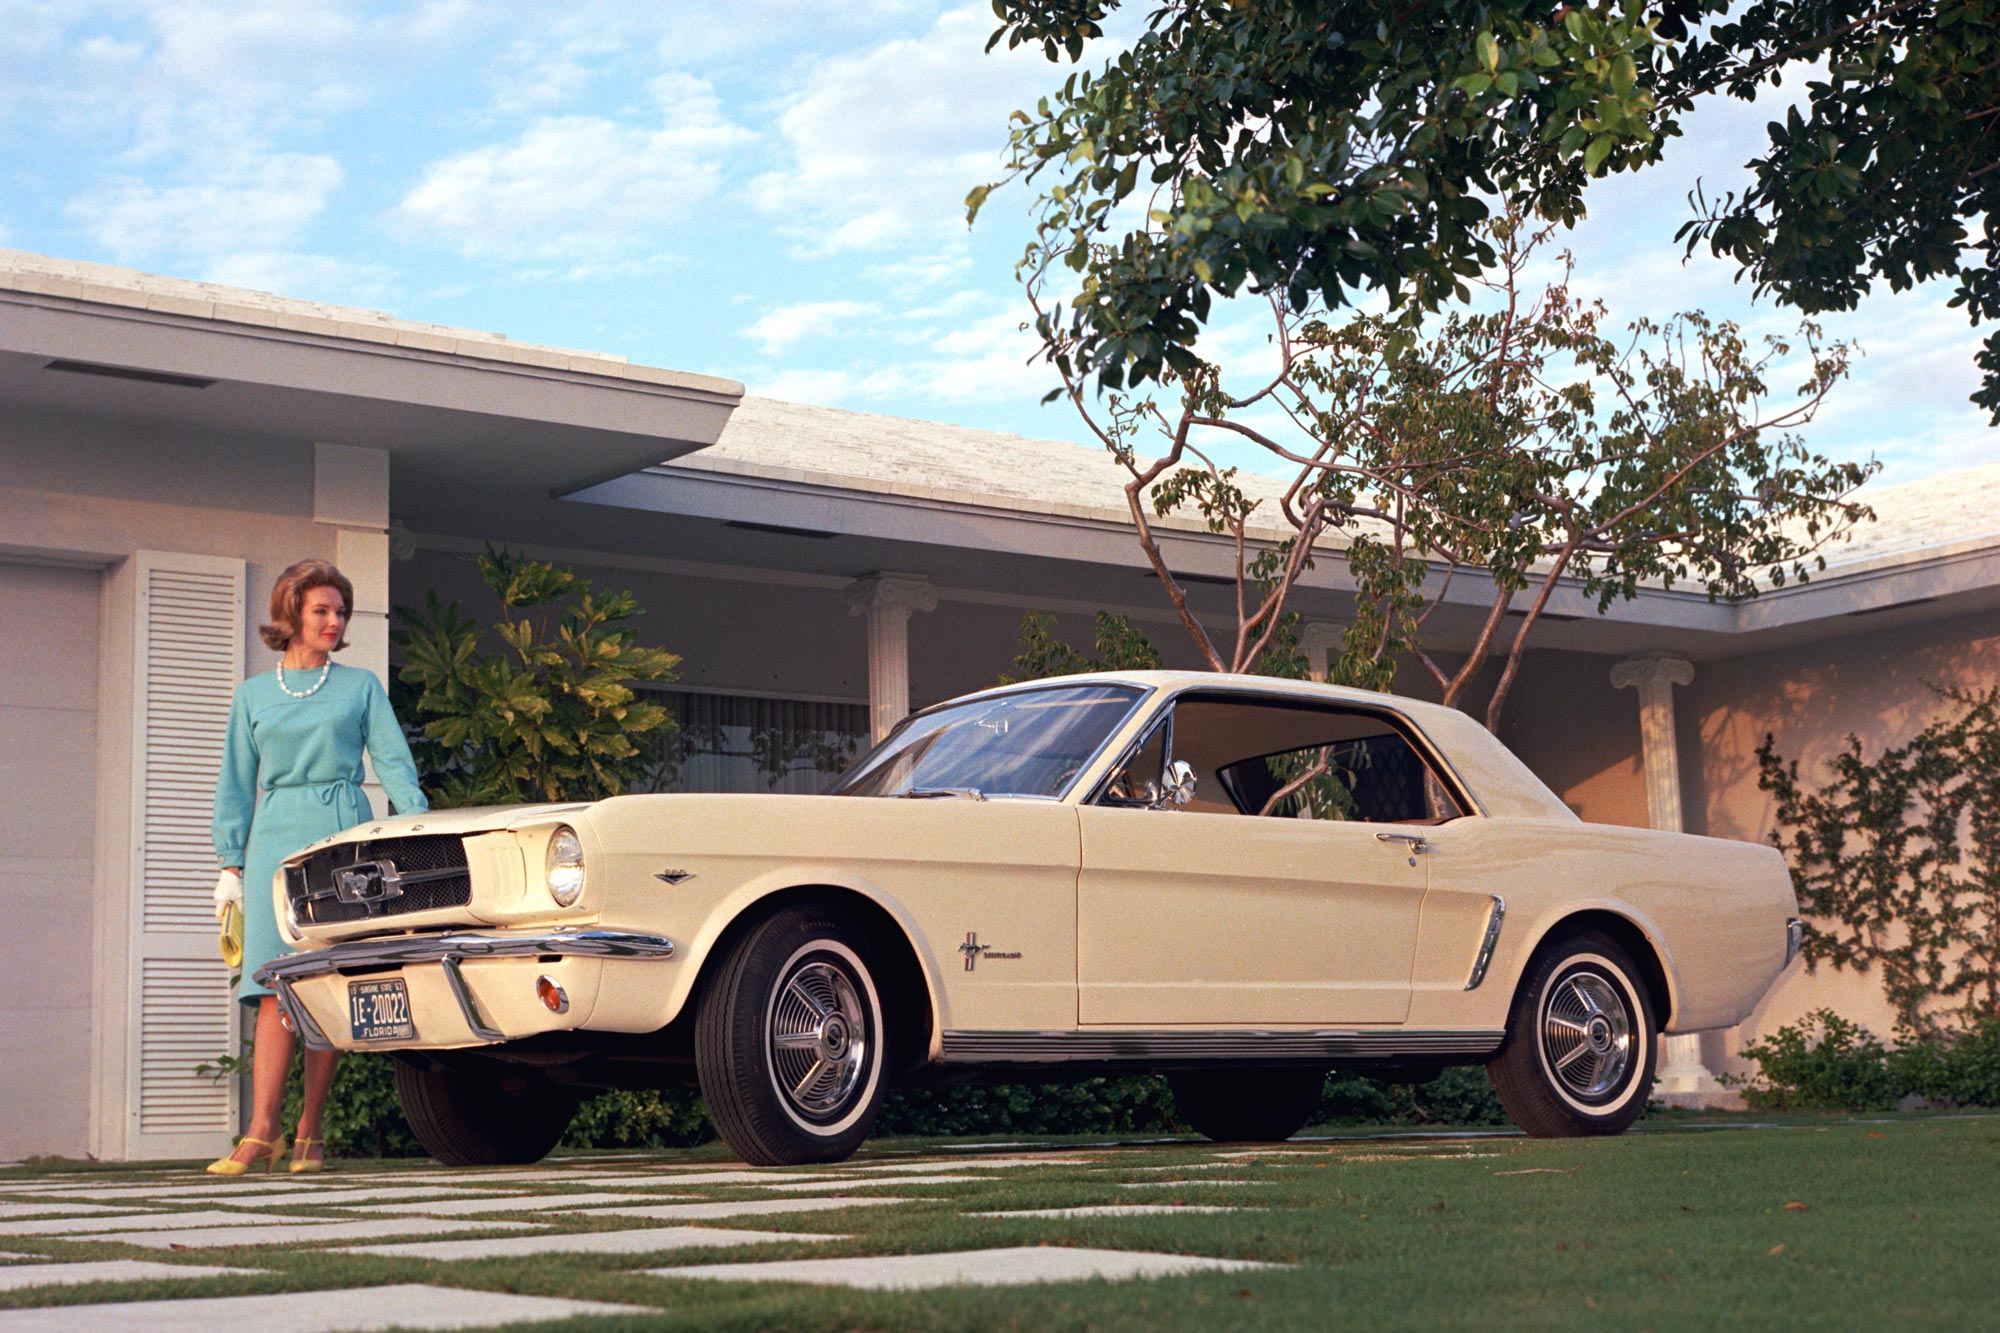 A white 1965 Ford Mustang